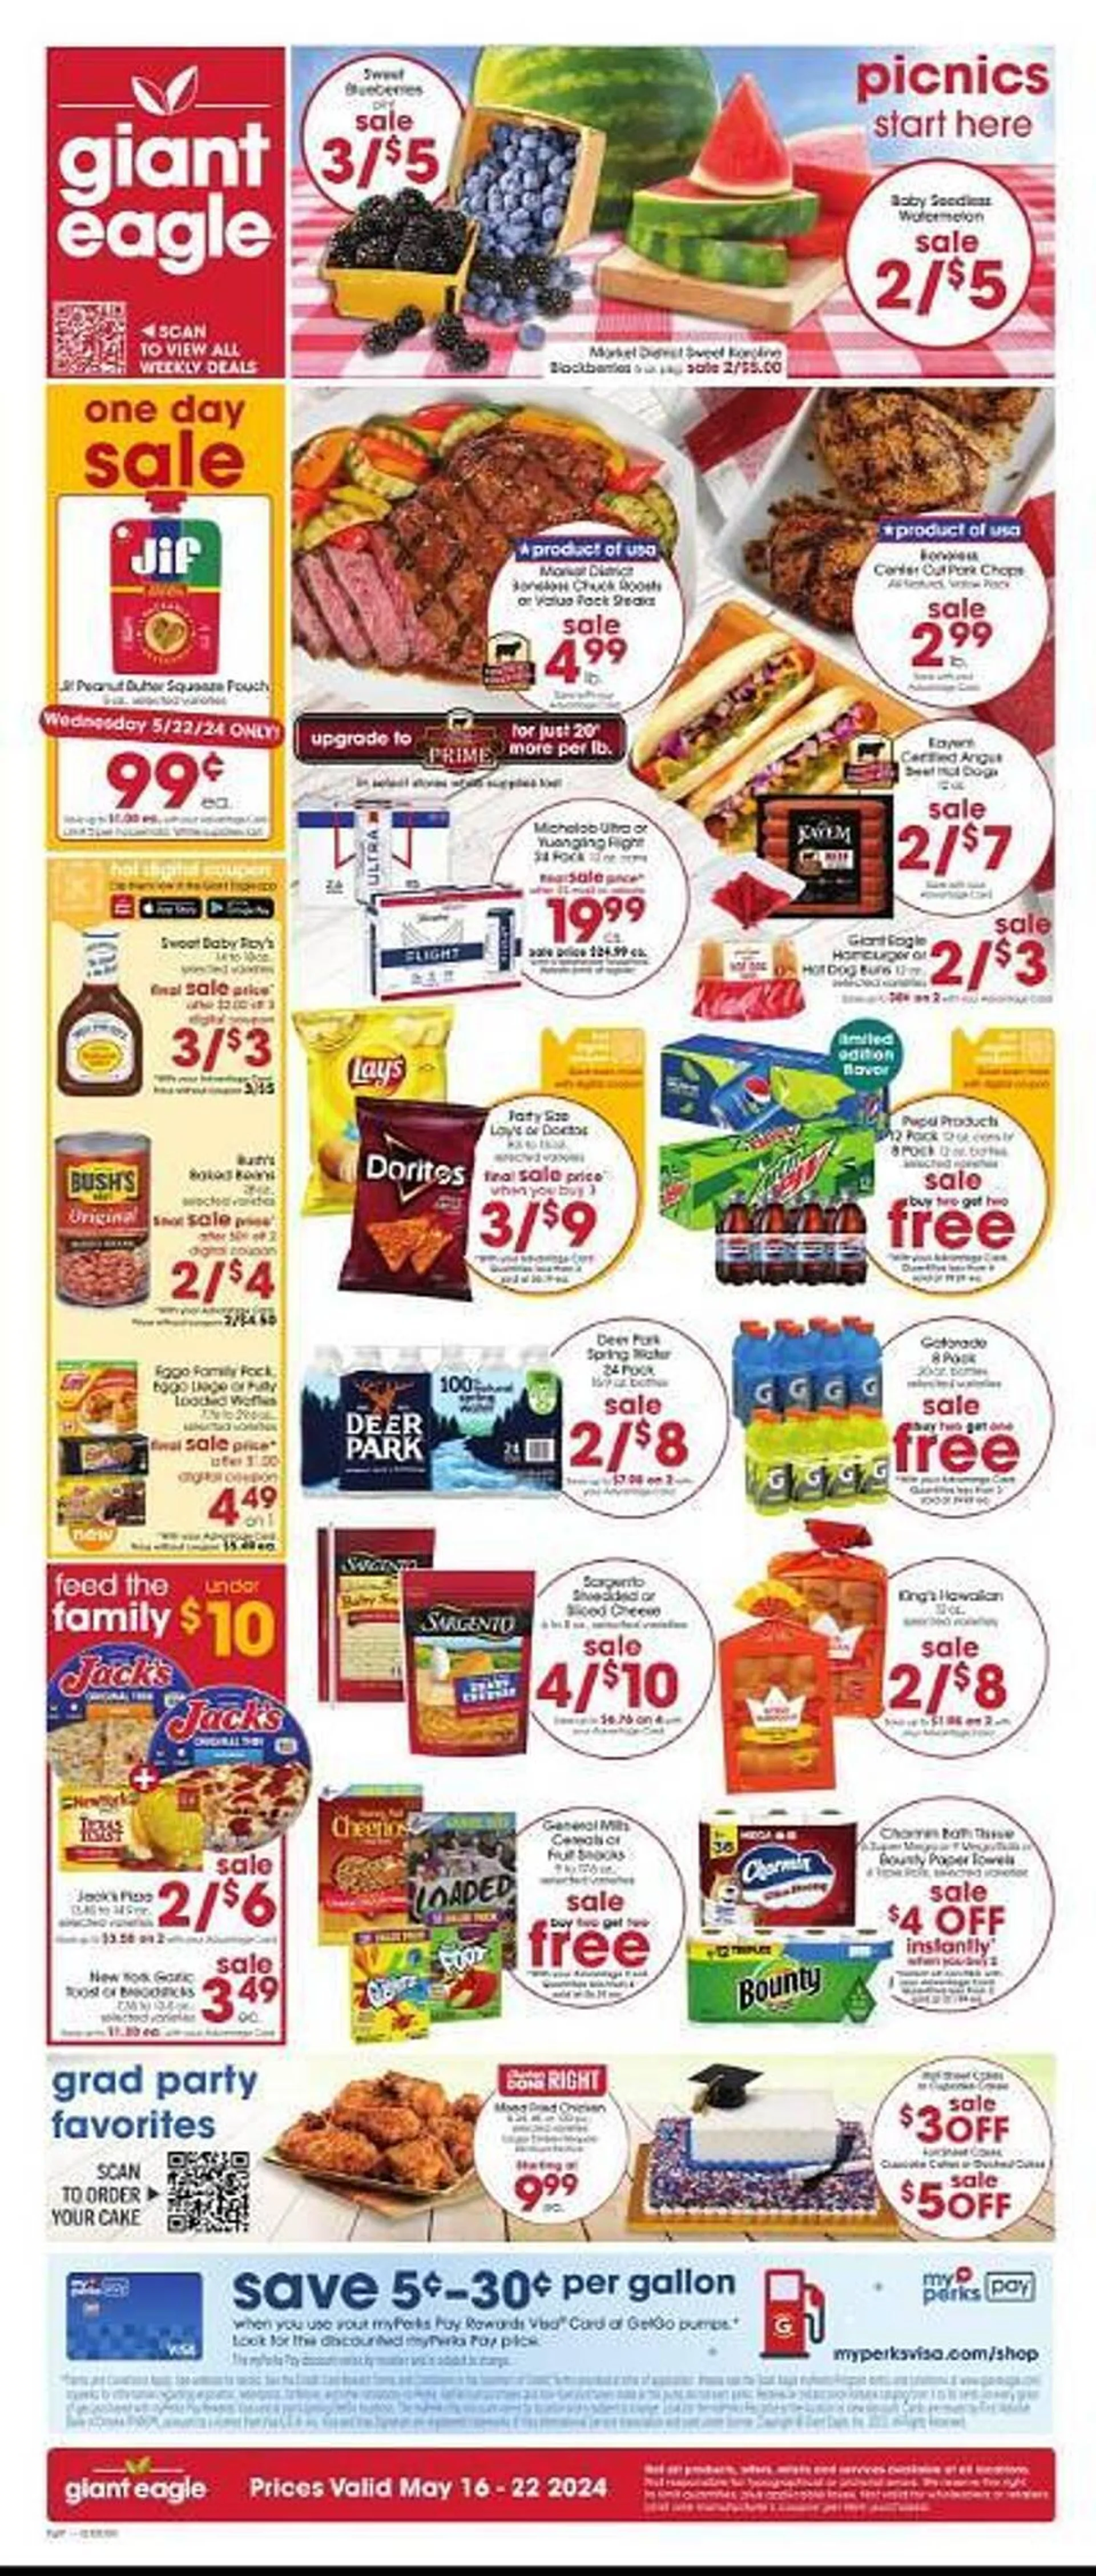 Giant Eagle Weekly Ad - 1